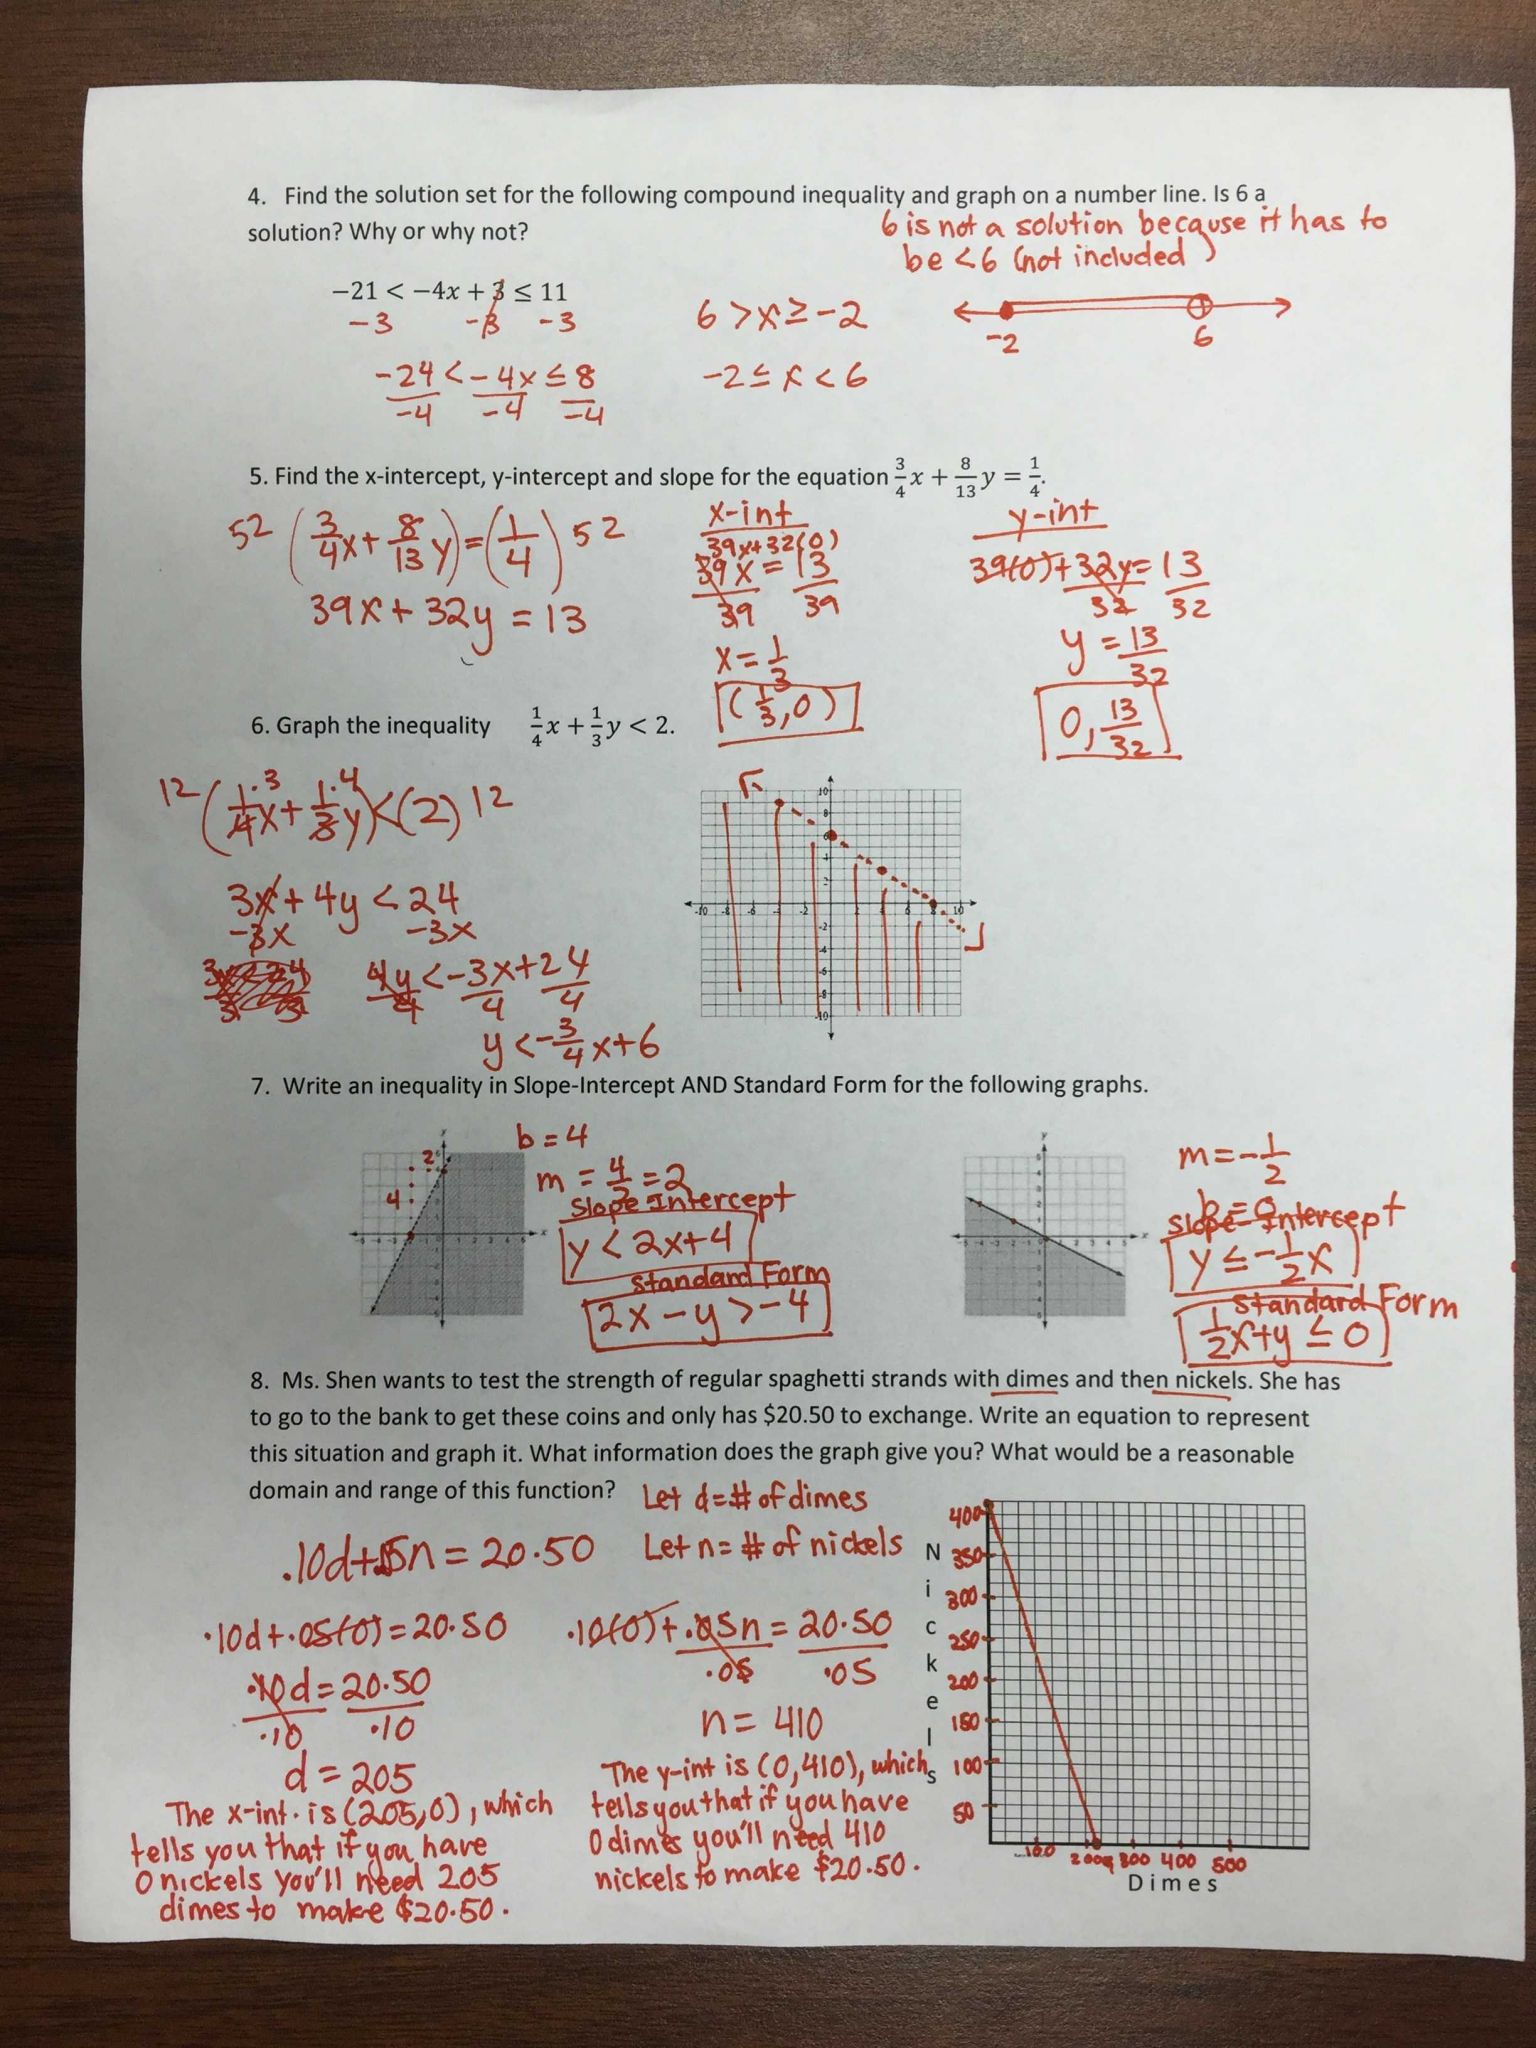 Compound Inequalities Worksheet Answers as Well as Colorful How to Find Math Answers Gallery Math Worksheets